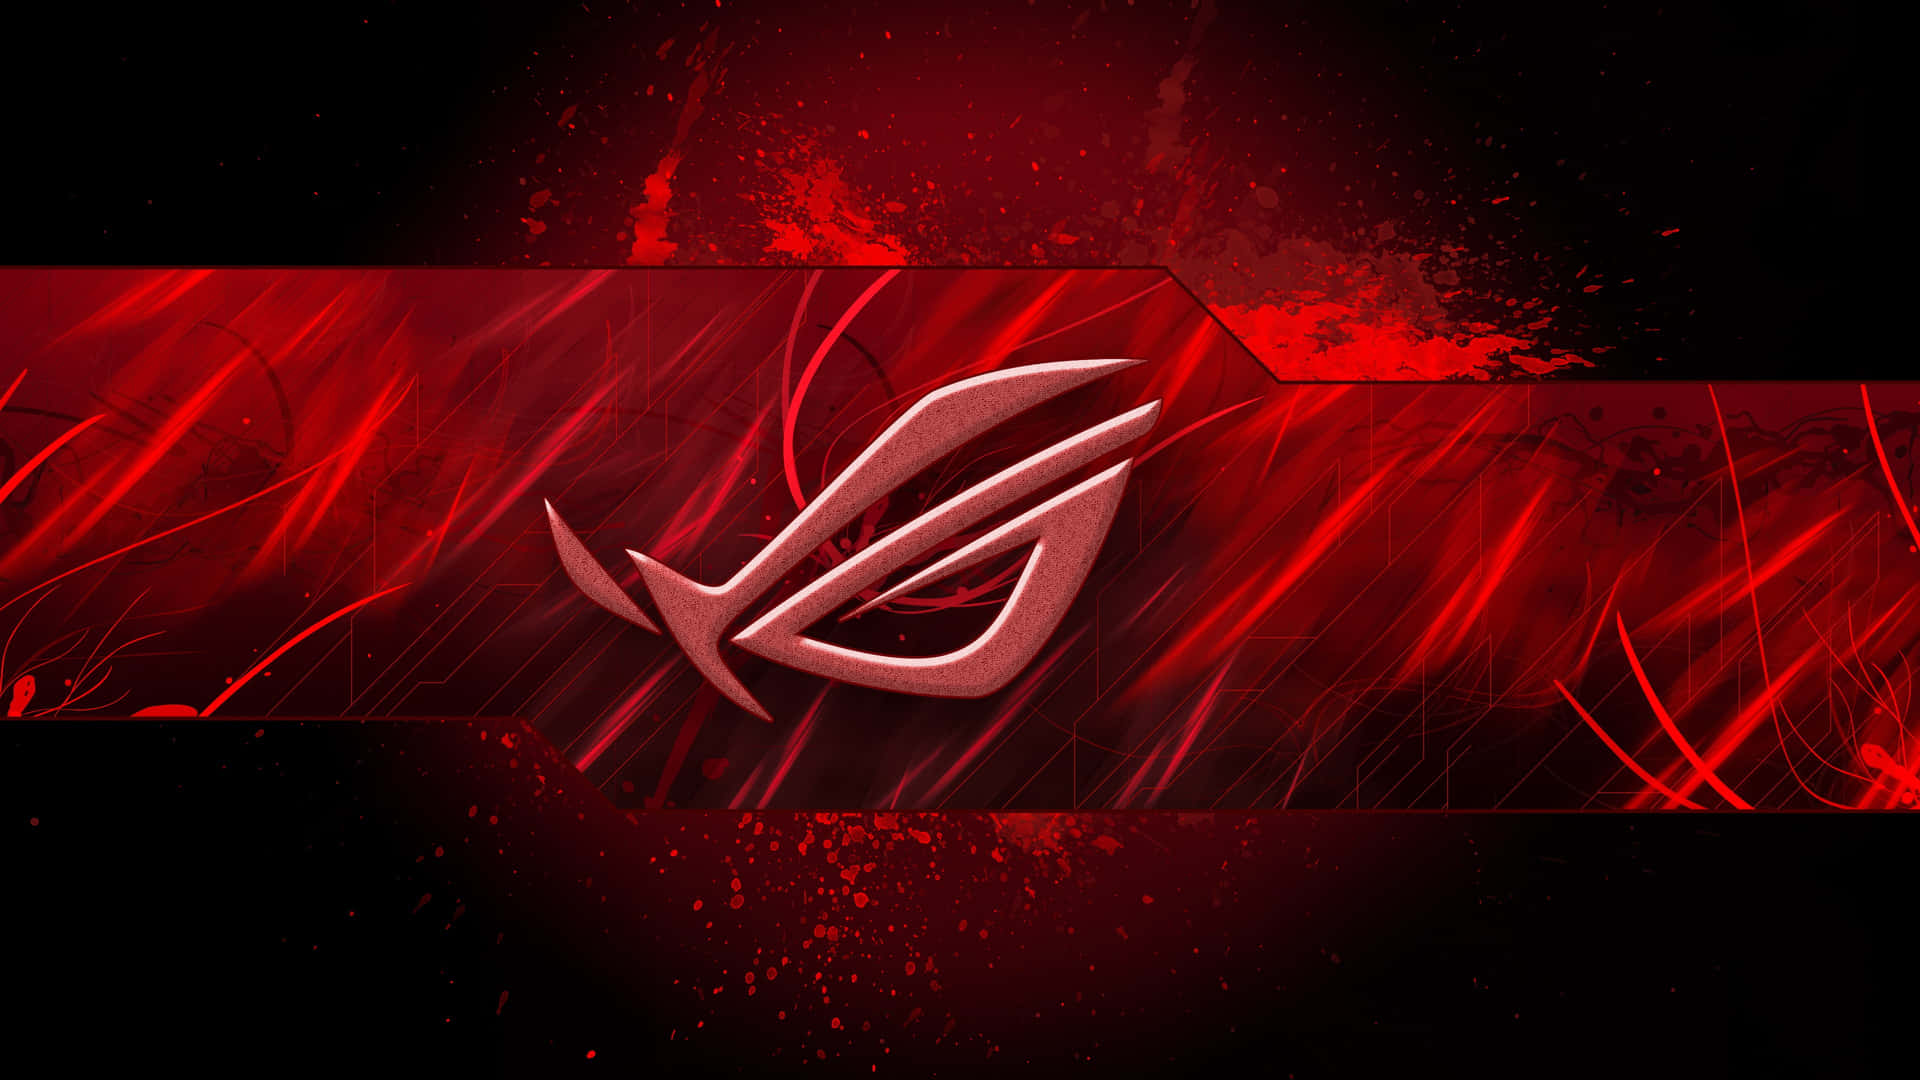 Feel the full power of the ROG gaming experience.